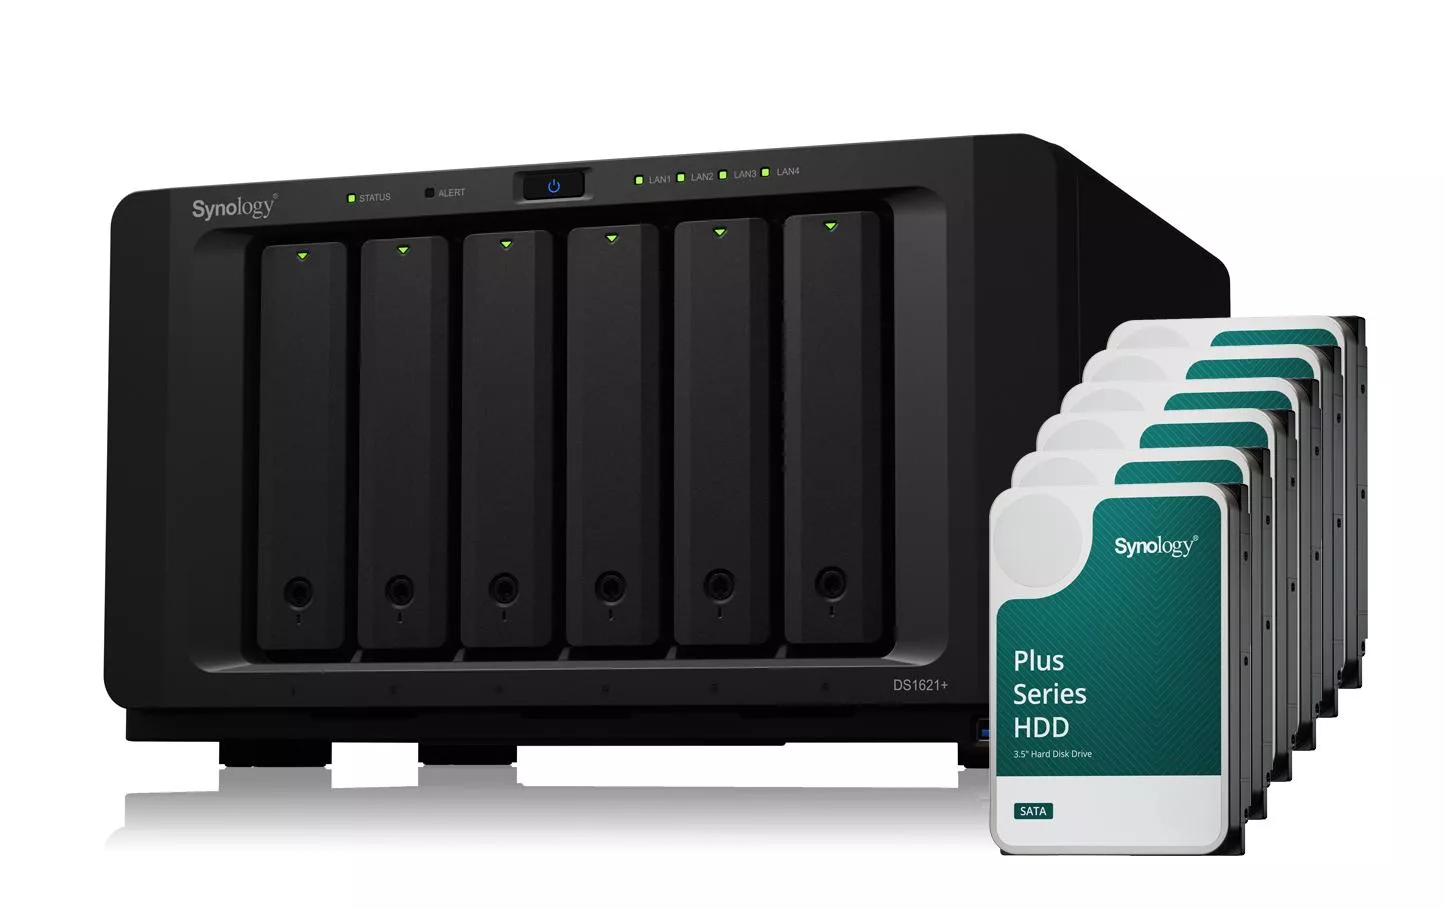 NAS DiskStation DS1621+ 6-bay Synology Plus HDD 24 TB